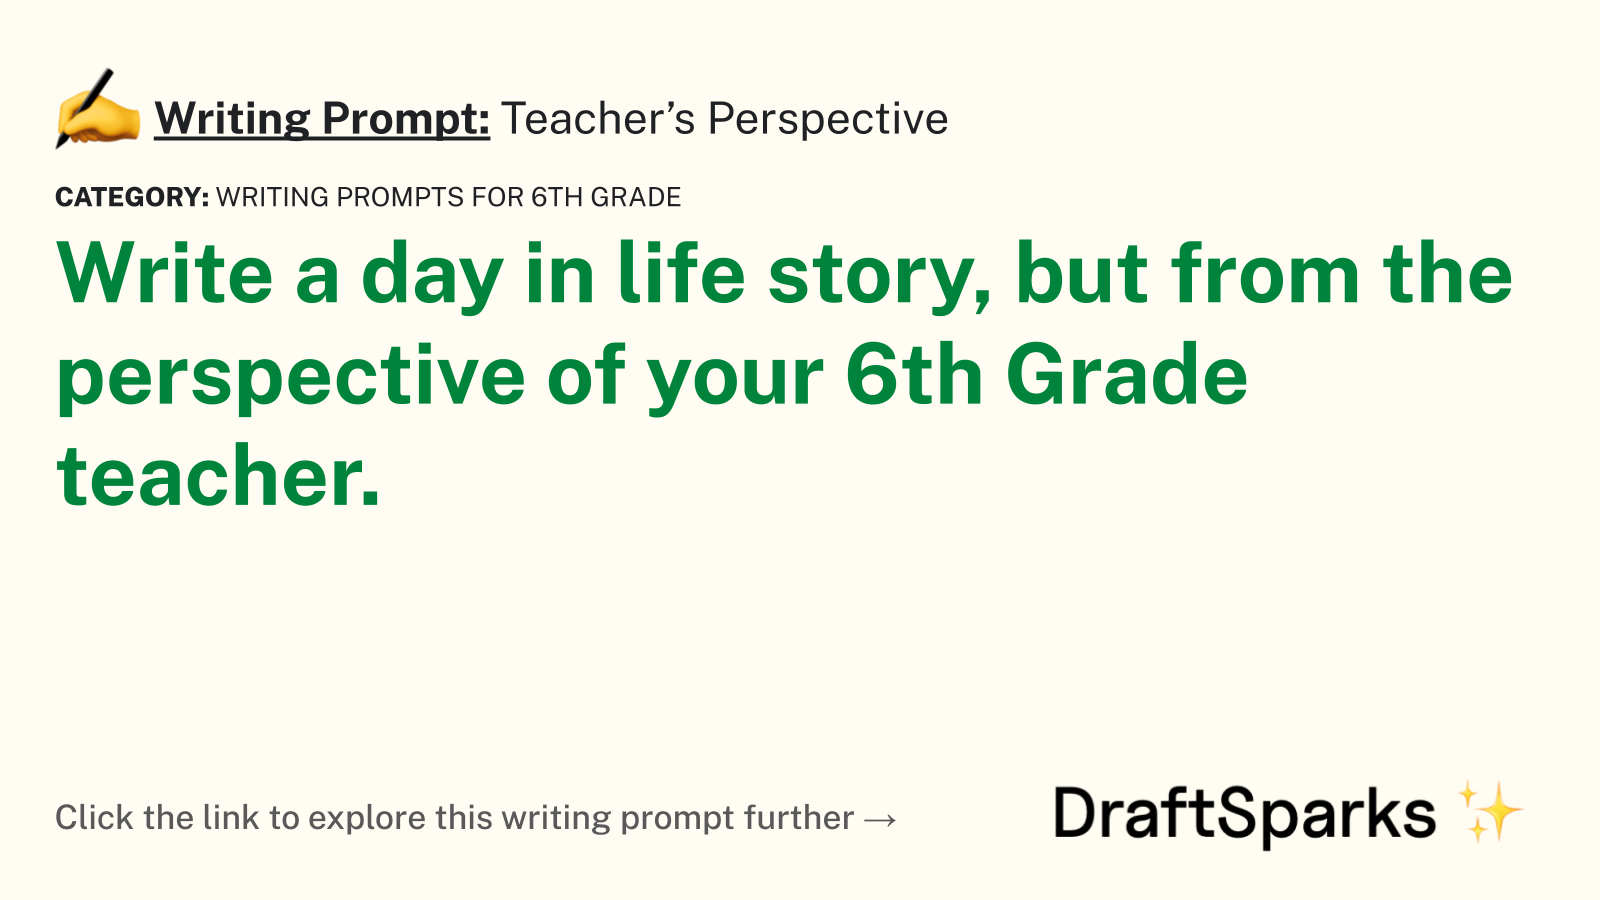 Writing Prompt: Teacher’s Perspective • DraftSparks